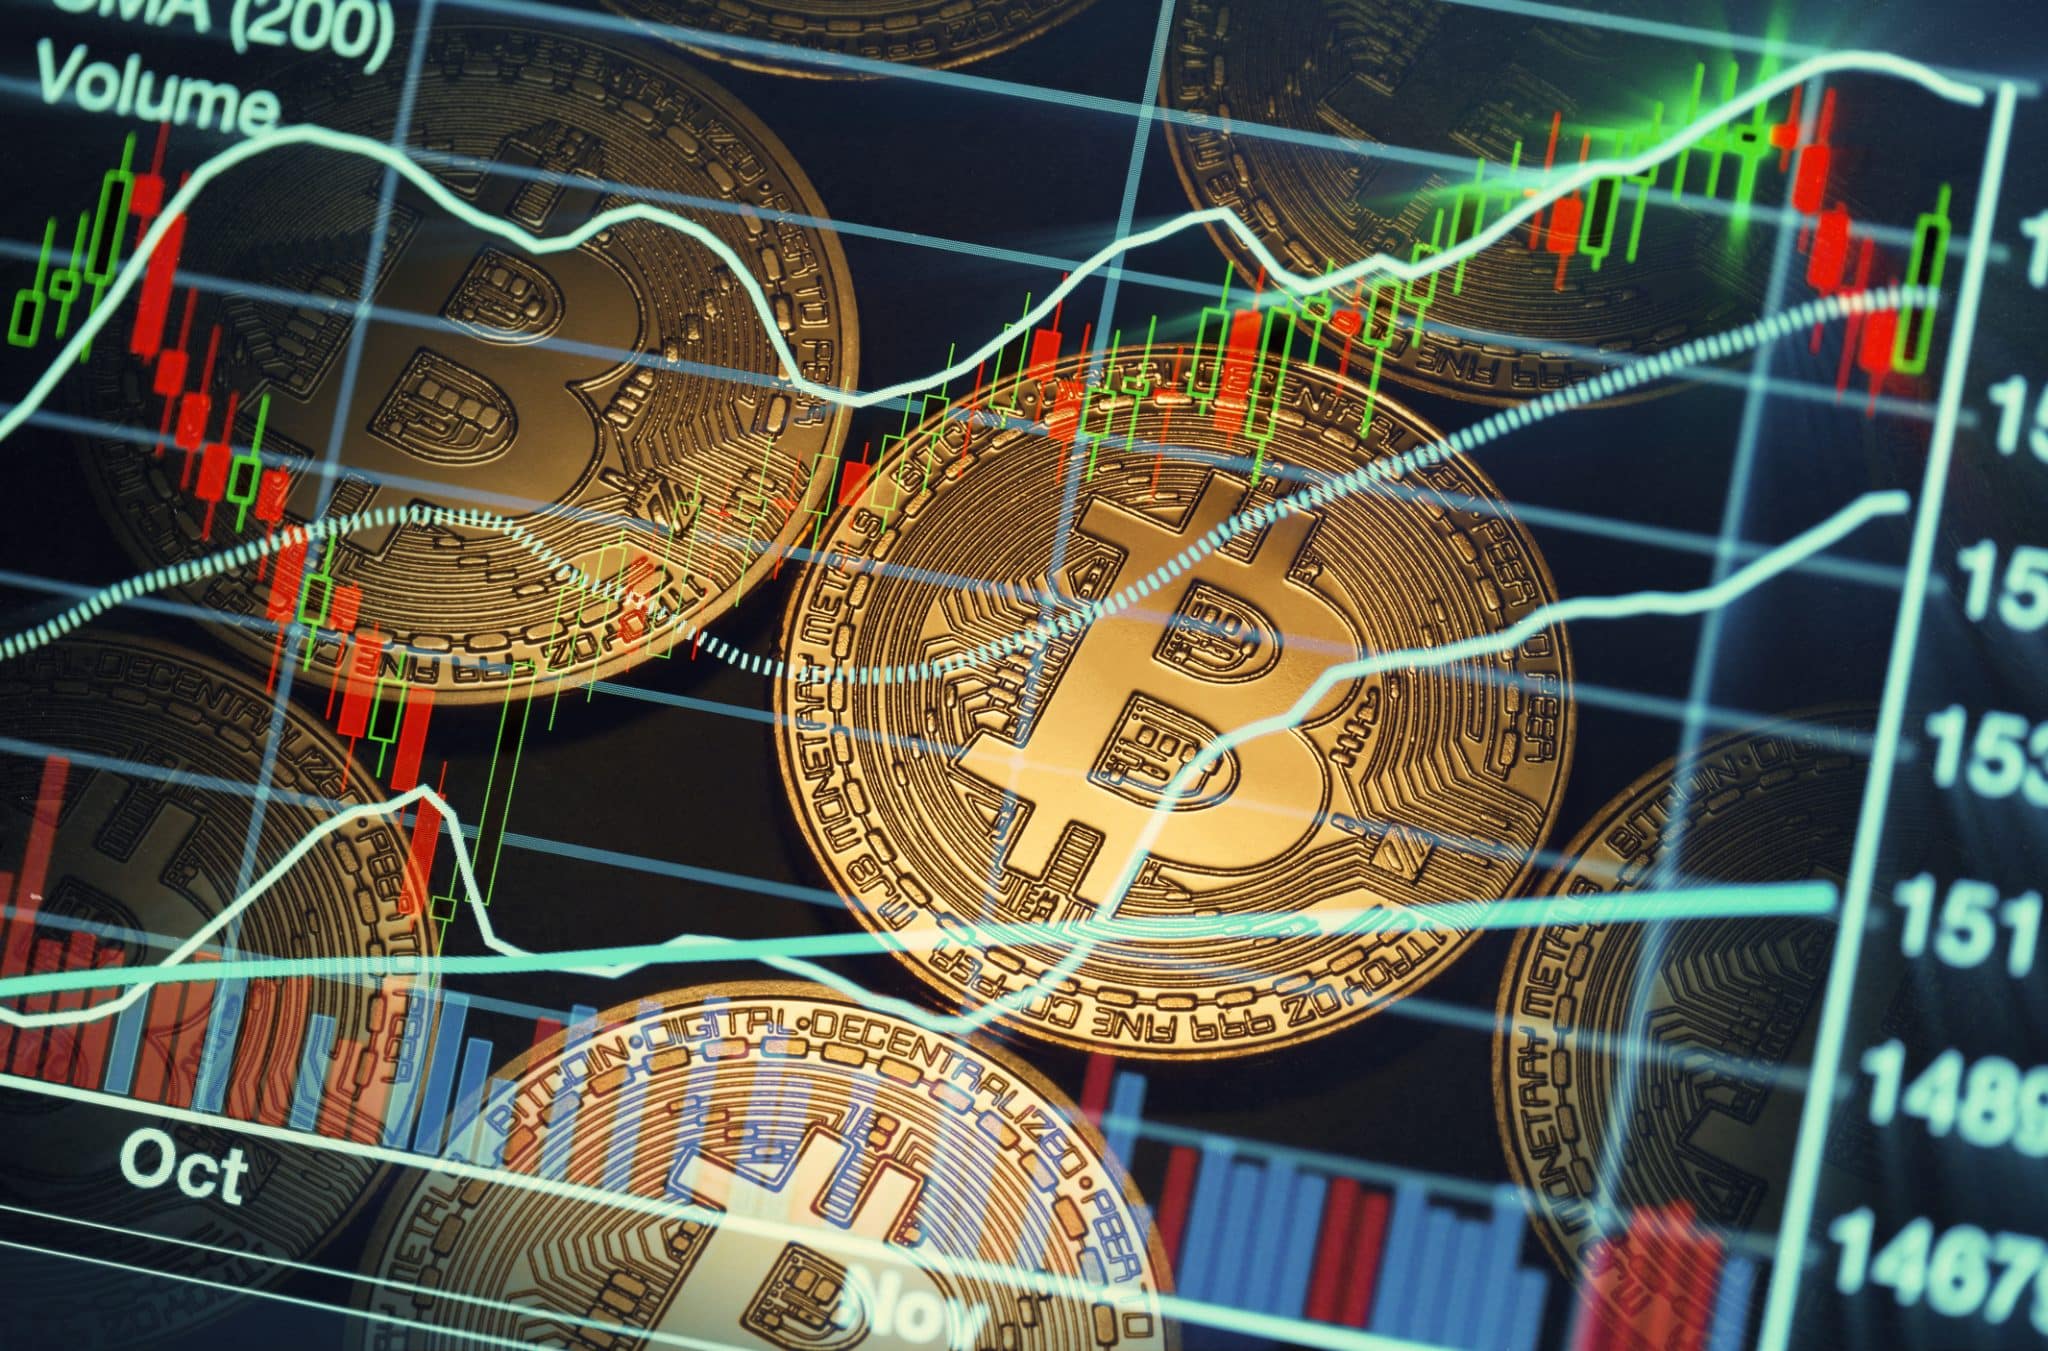 Why Did Bitcoin Soar Today? Analysis Company Comments: “The Rally Provided Major Relief”